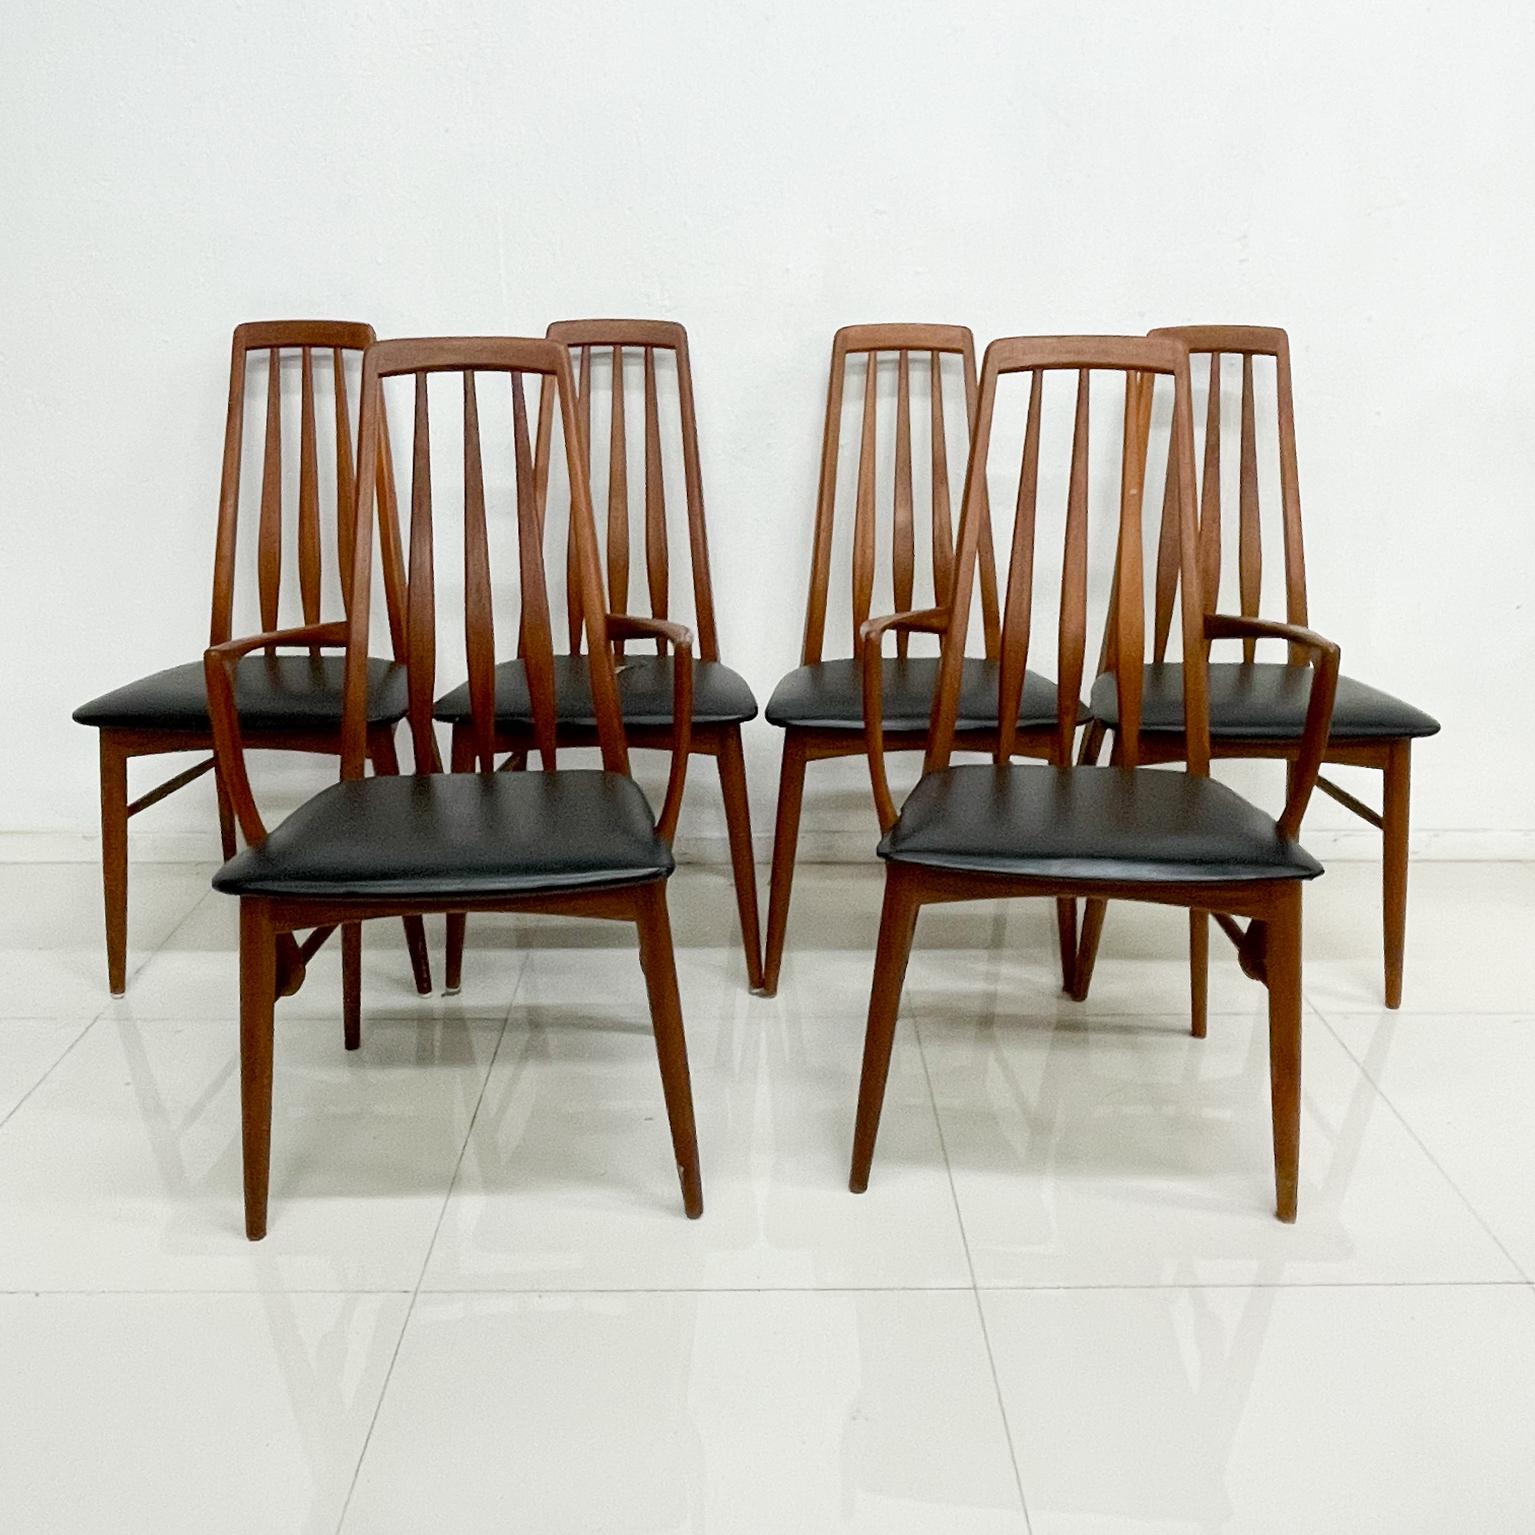 Six Eva Chairs
Midcentury modern classic Niels Koefoed EVA Chair Set of Six in Teakwood
Includes two captain chairs with arms. Black faux leather.
Maker stamped Denmark
For Hornslet Koefoeds
Side chairs 37.75 H x 20.5 W x 17.5 D Seat 18, arm rest